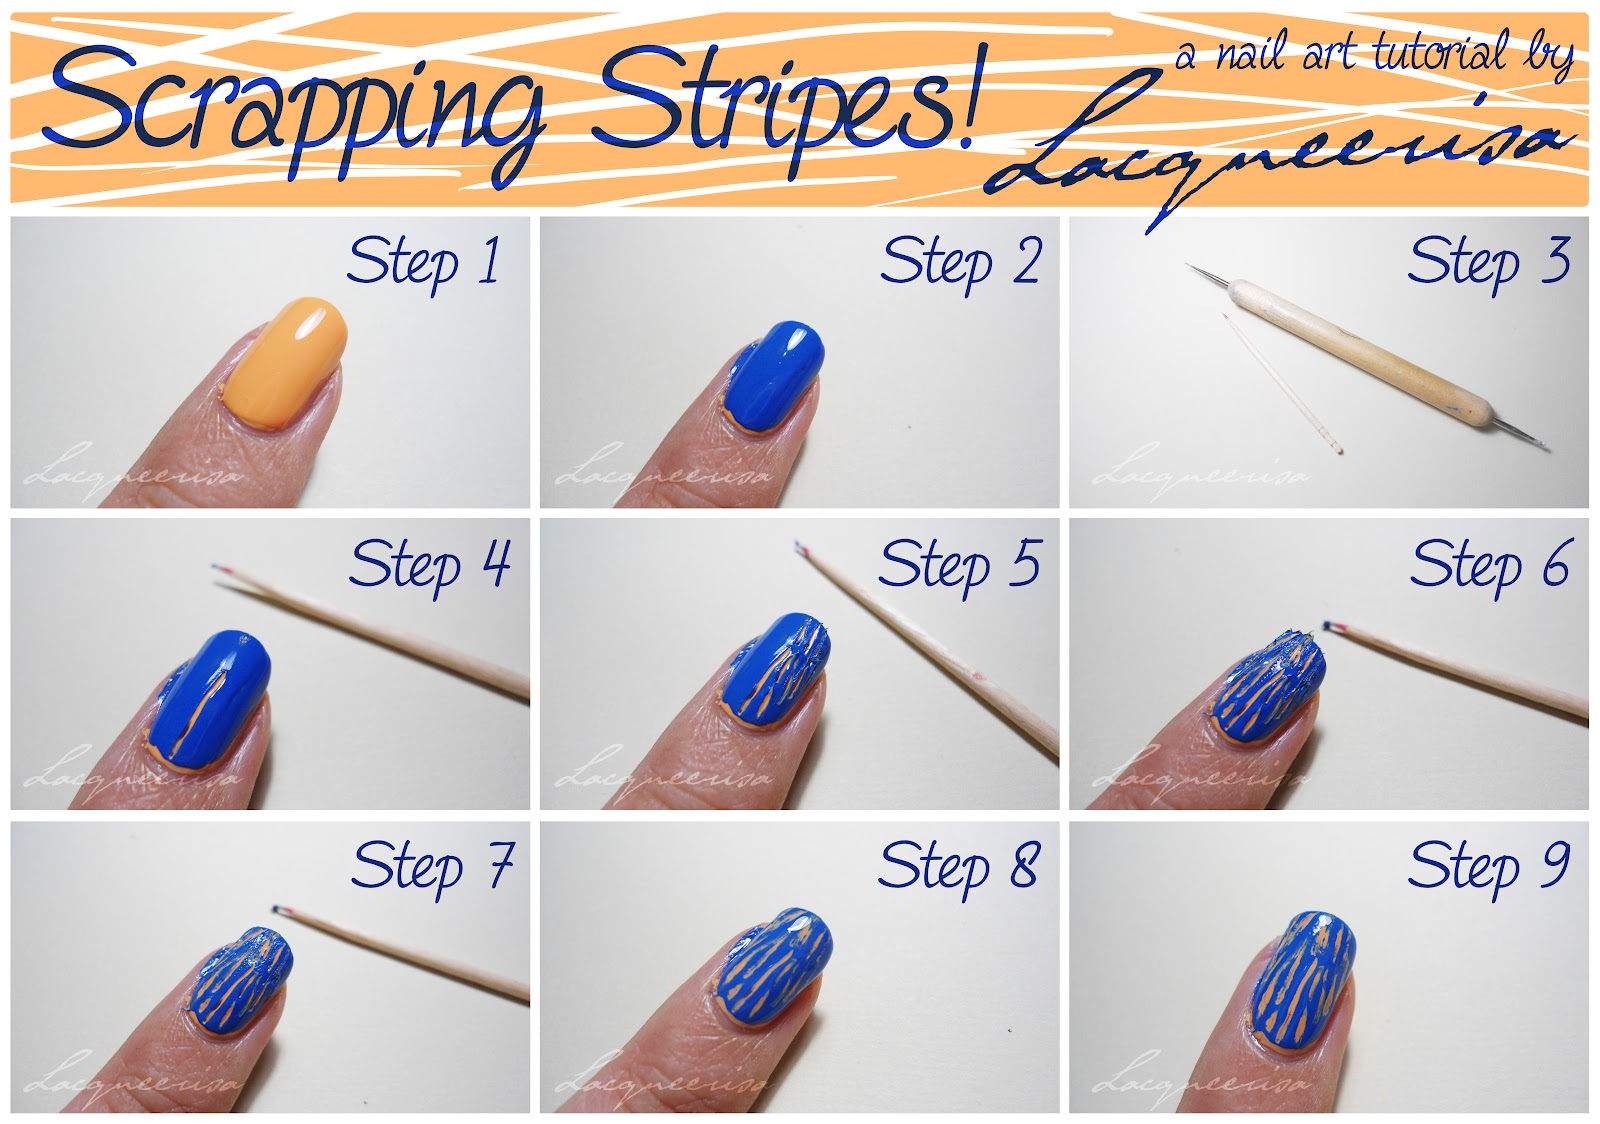 9. Step by Step Tutorial for Nail Art with Dotting Tools - wide 3